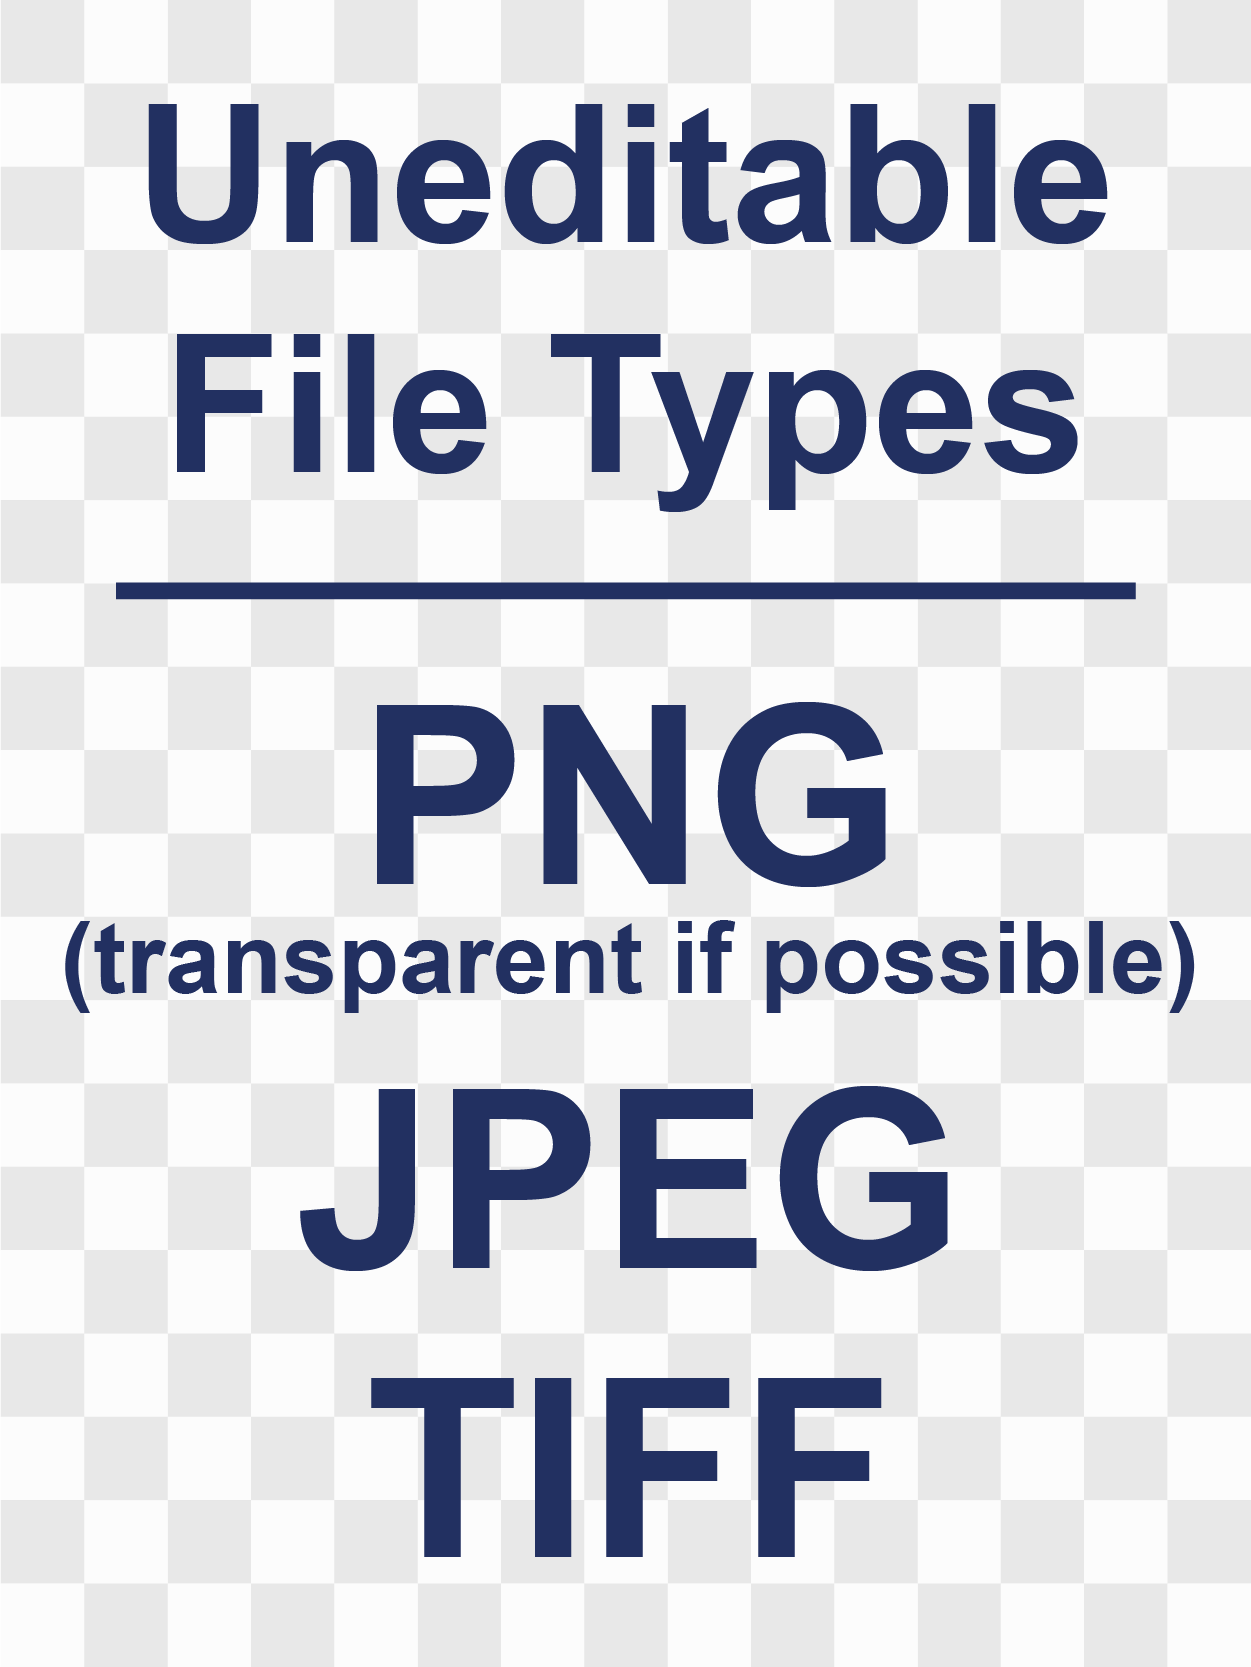 Uneditable file type recommendations